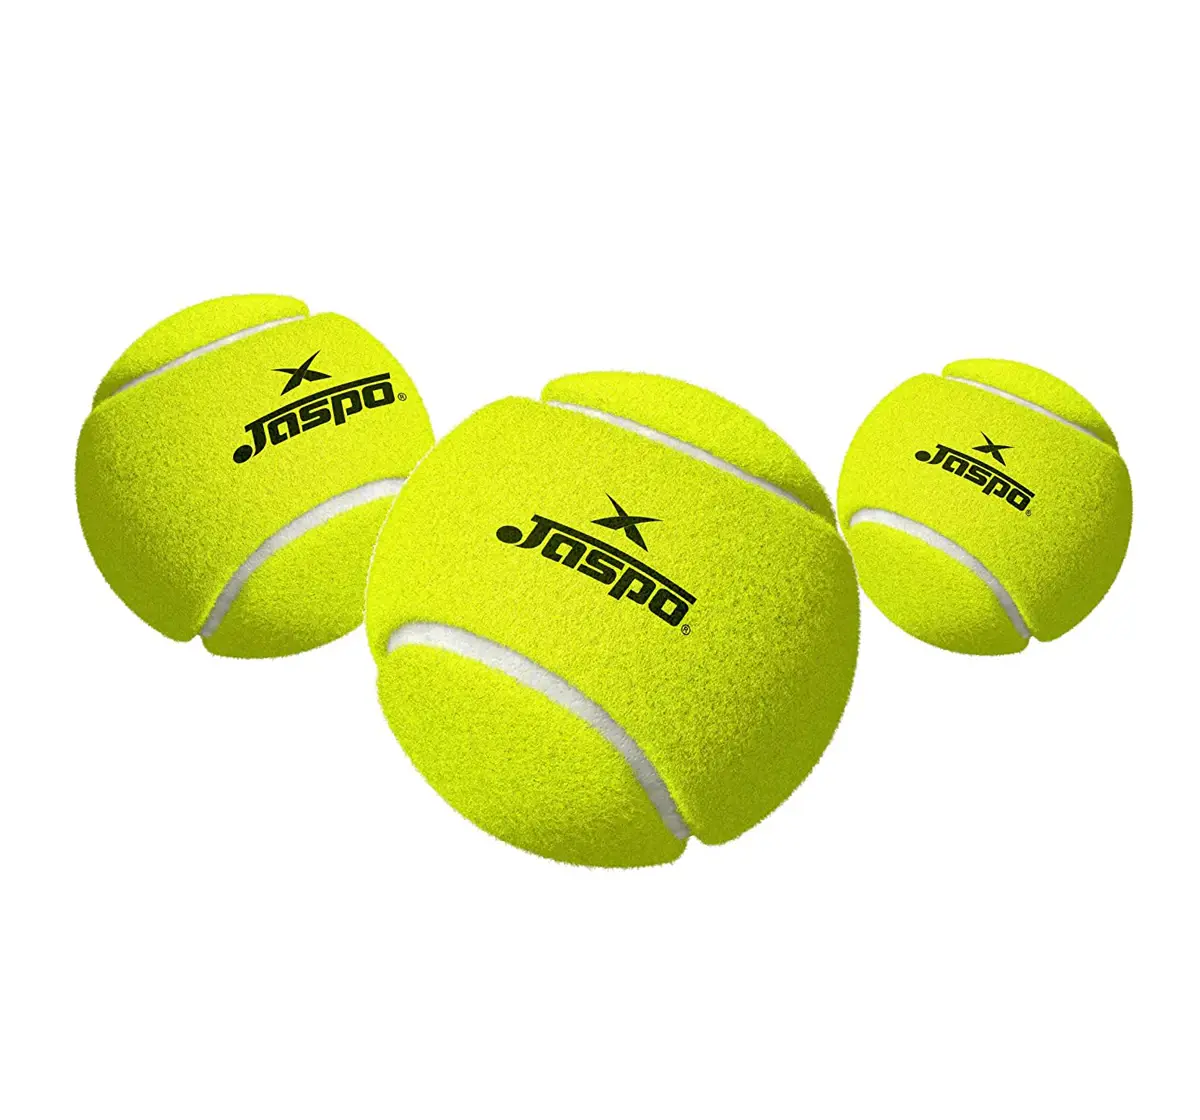 Jaspo Natural Rubber Synthetic Light Weight Cricket Tennis Ball Green Pack Of 3 Green 6Y+